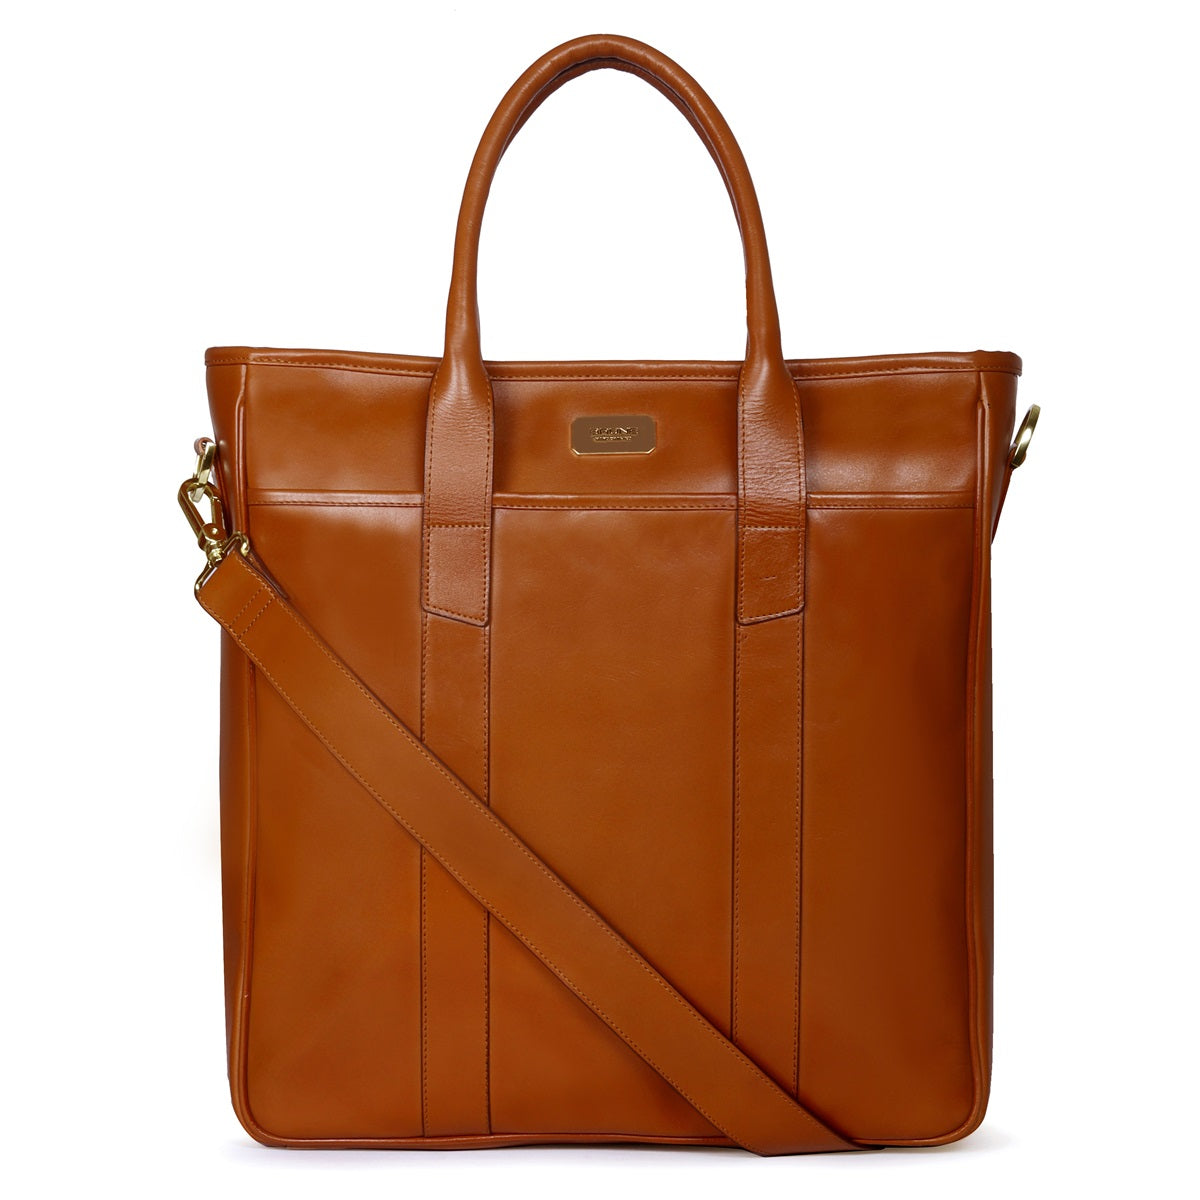 Detachable Strap Full-Length Exterior Pockets Zip Compartment Tan Leather Tote Bag By Brune & Bareskin